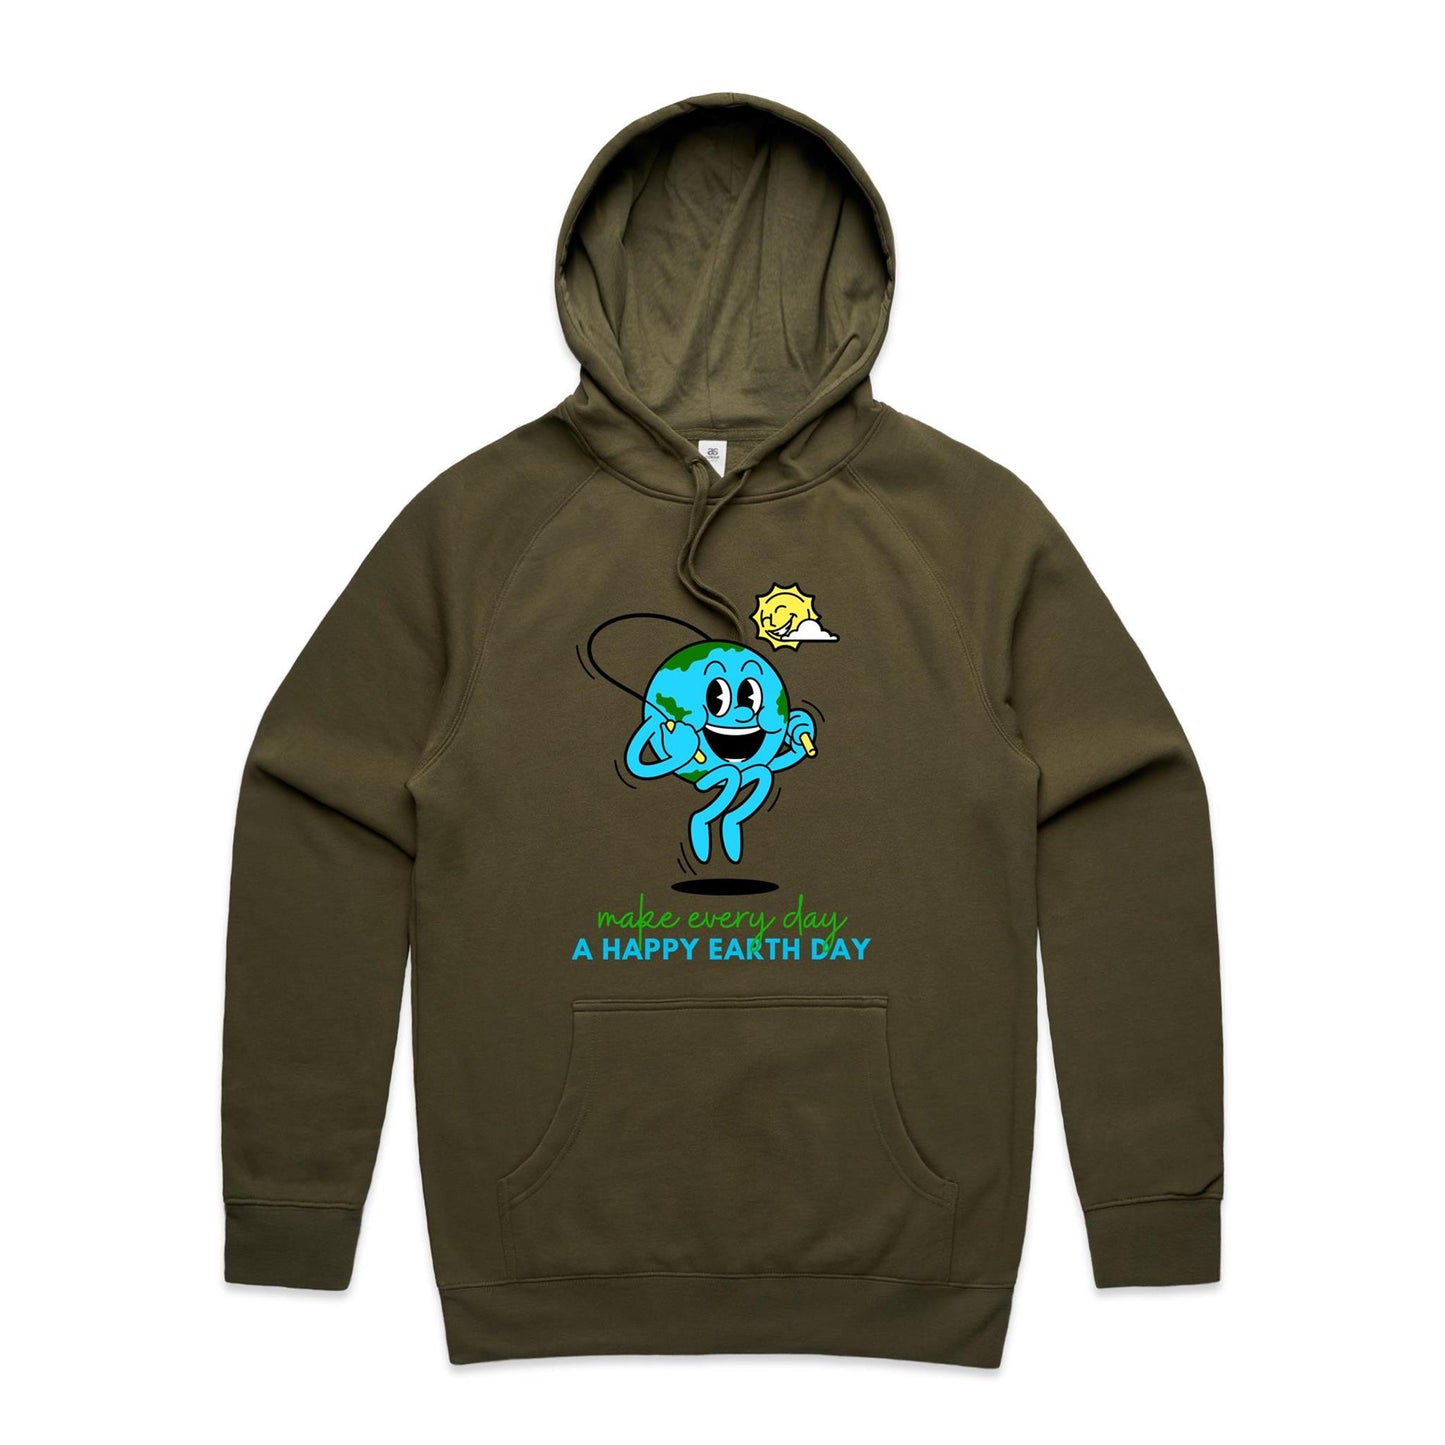 Make Every Day A Happy Earth Day - Supply Hood Army Mens Supply Hoodie Environment